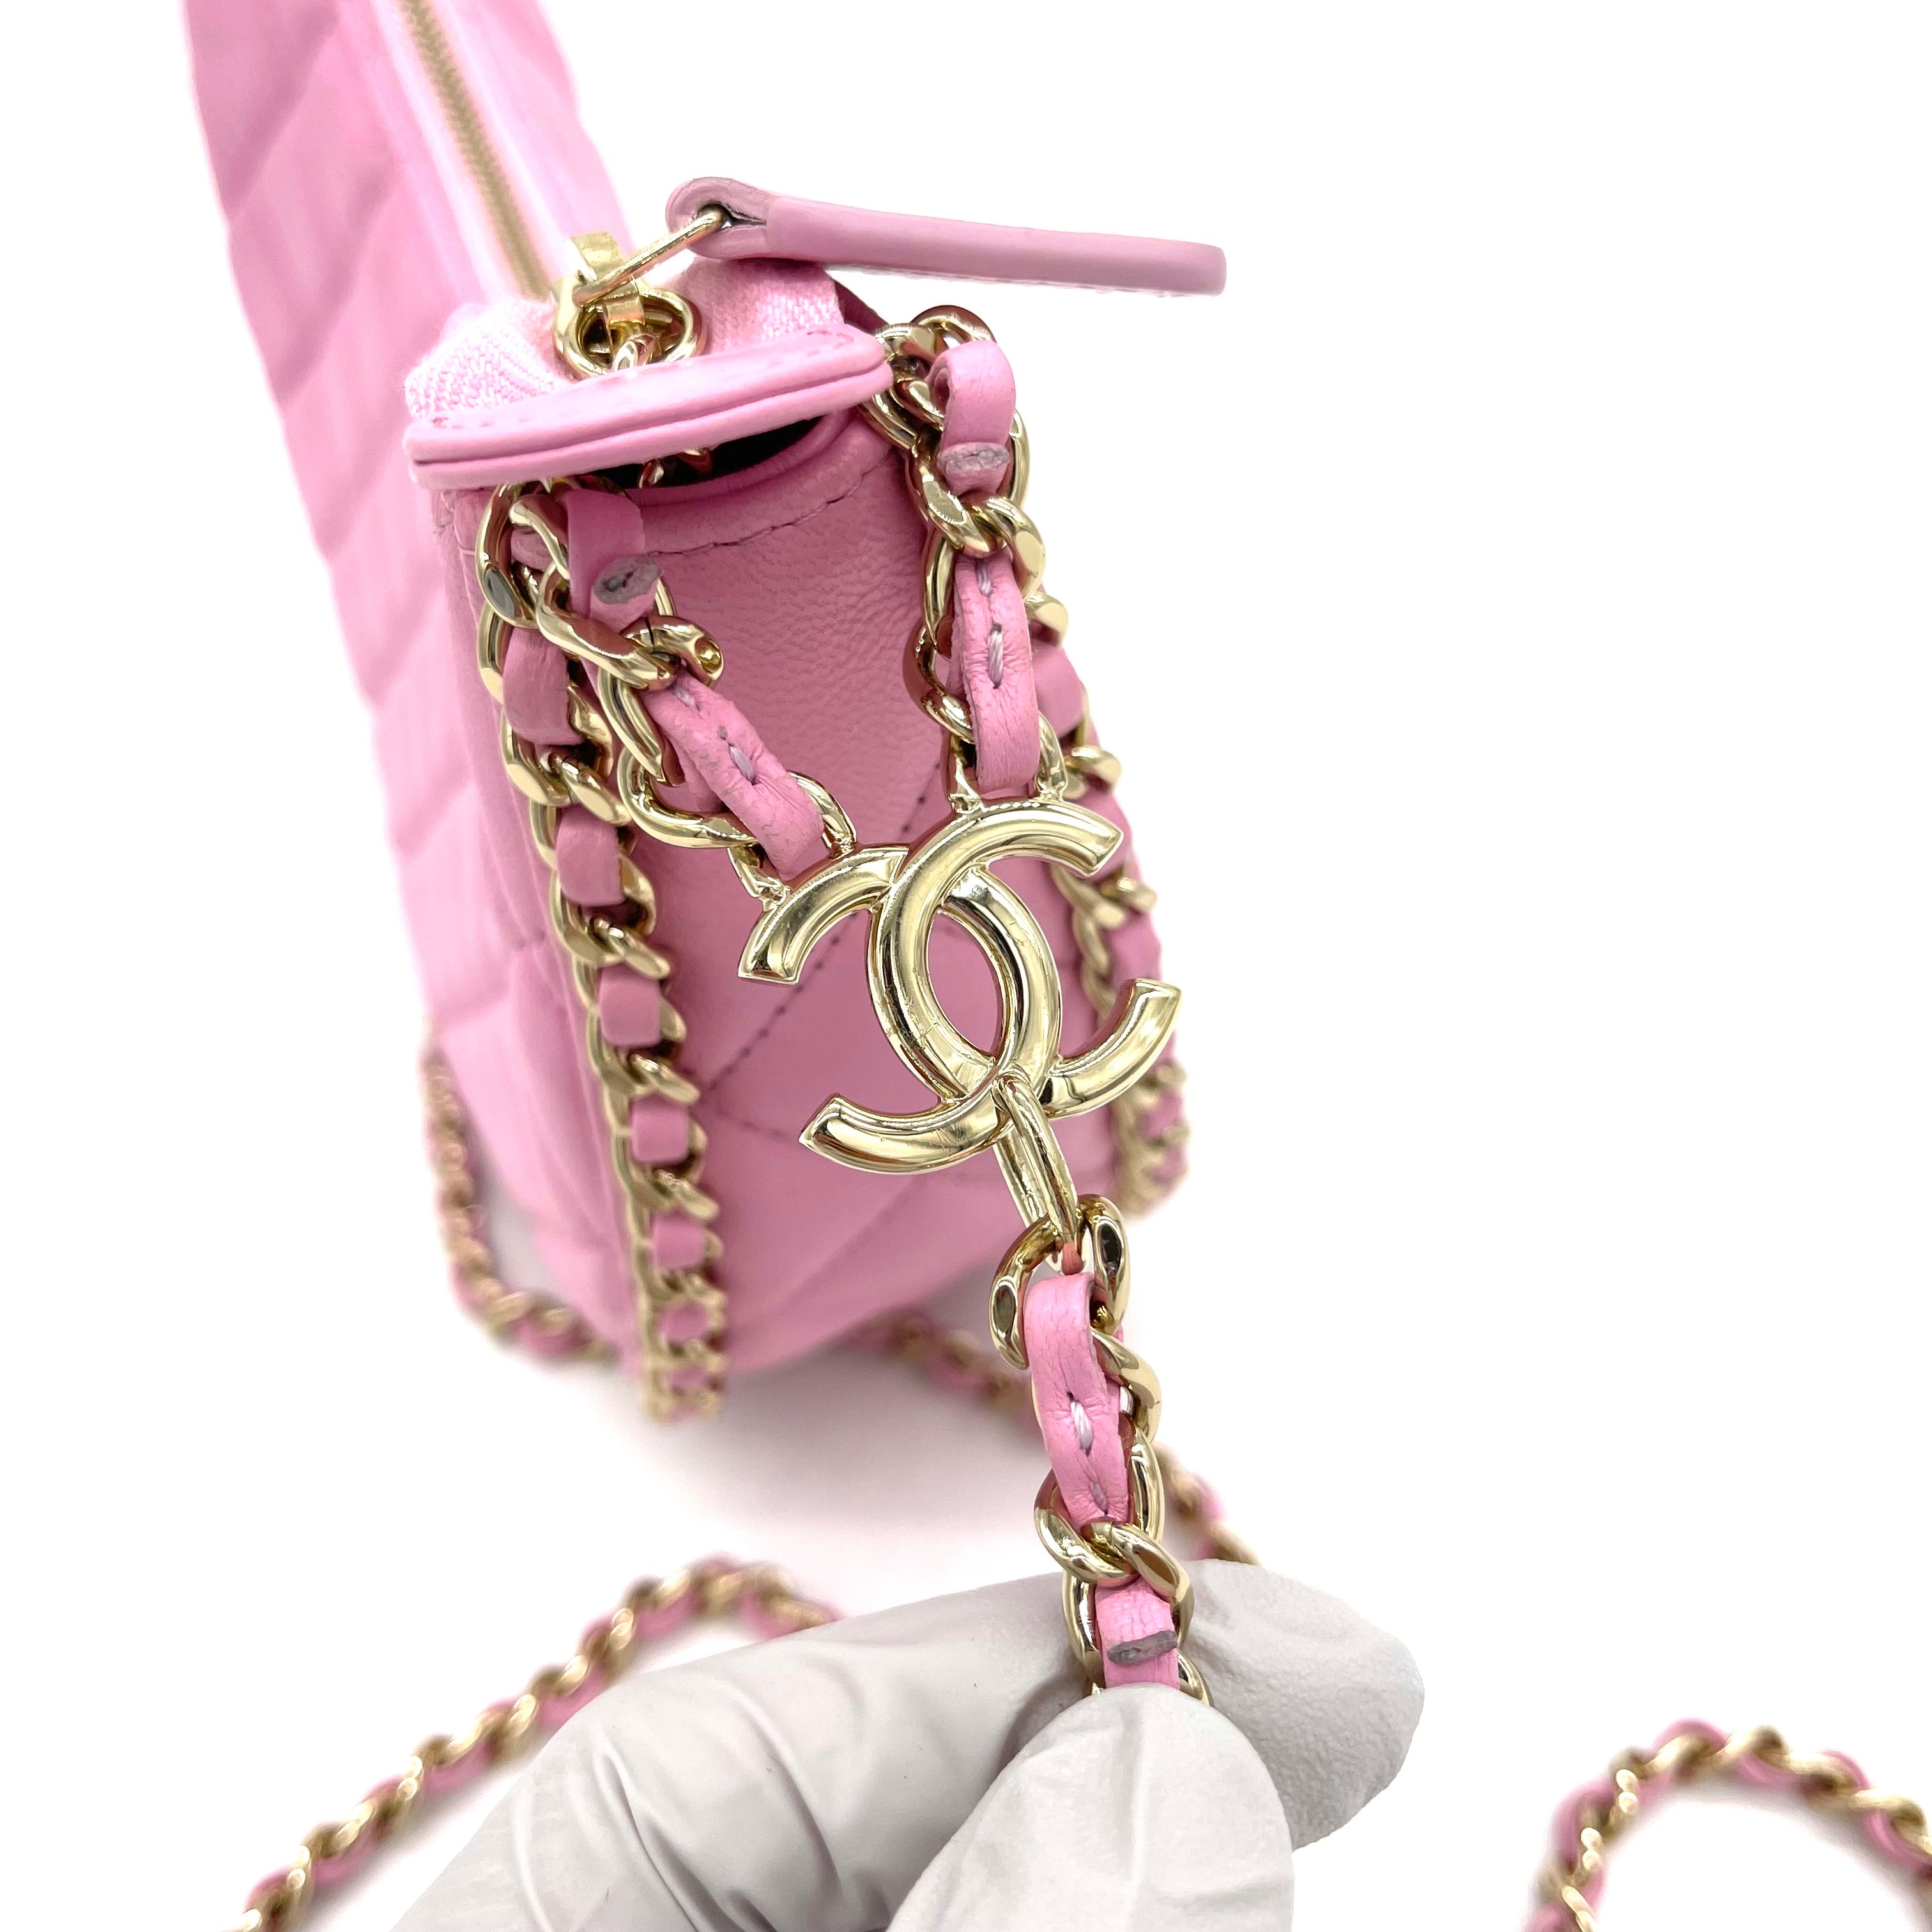 chanel pink quilted bag  Pink chanel bag, Pink chanel, Chanel bag